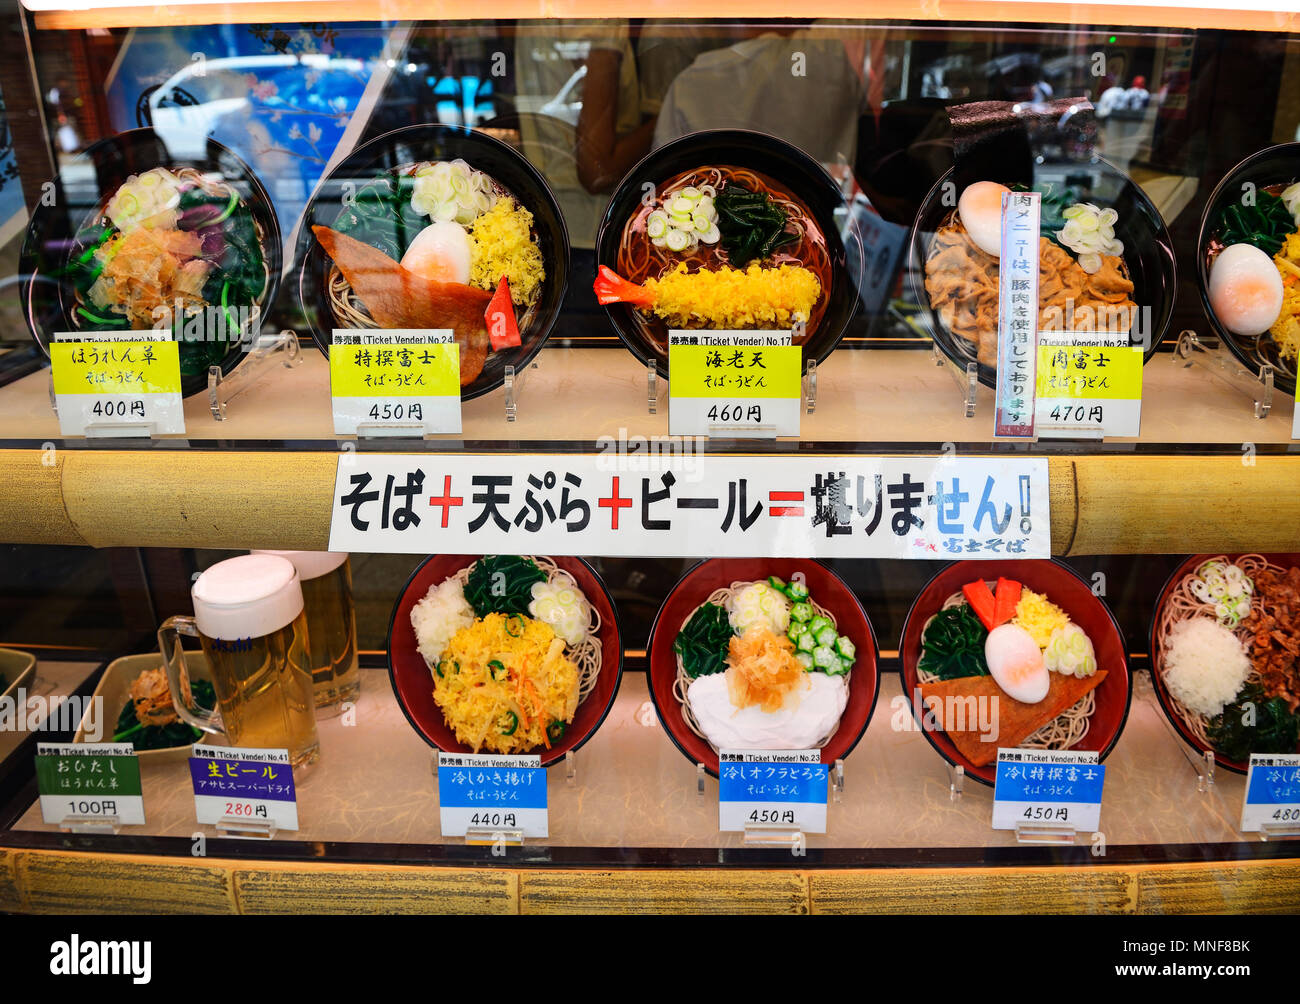 Display in restaurant with Japanese dishes, Asakusa district, Tokyo, Japan Stock Photo